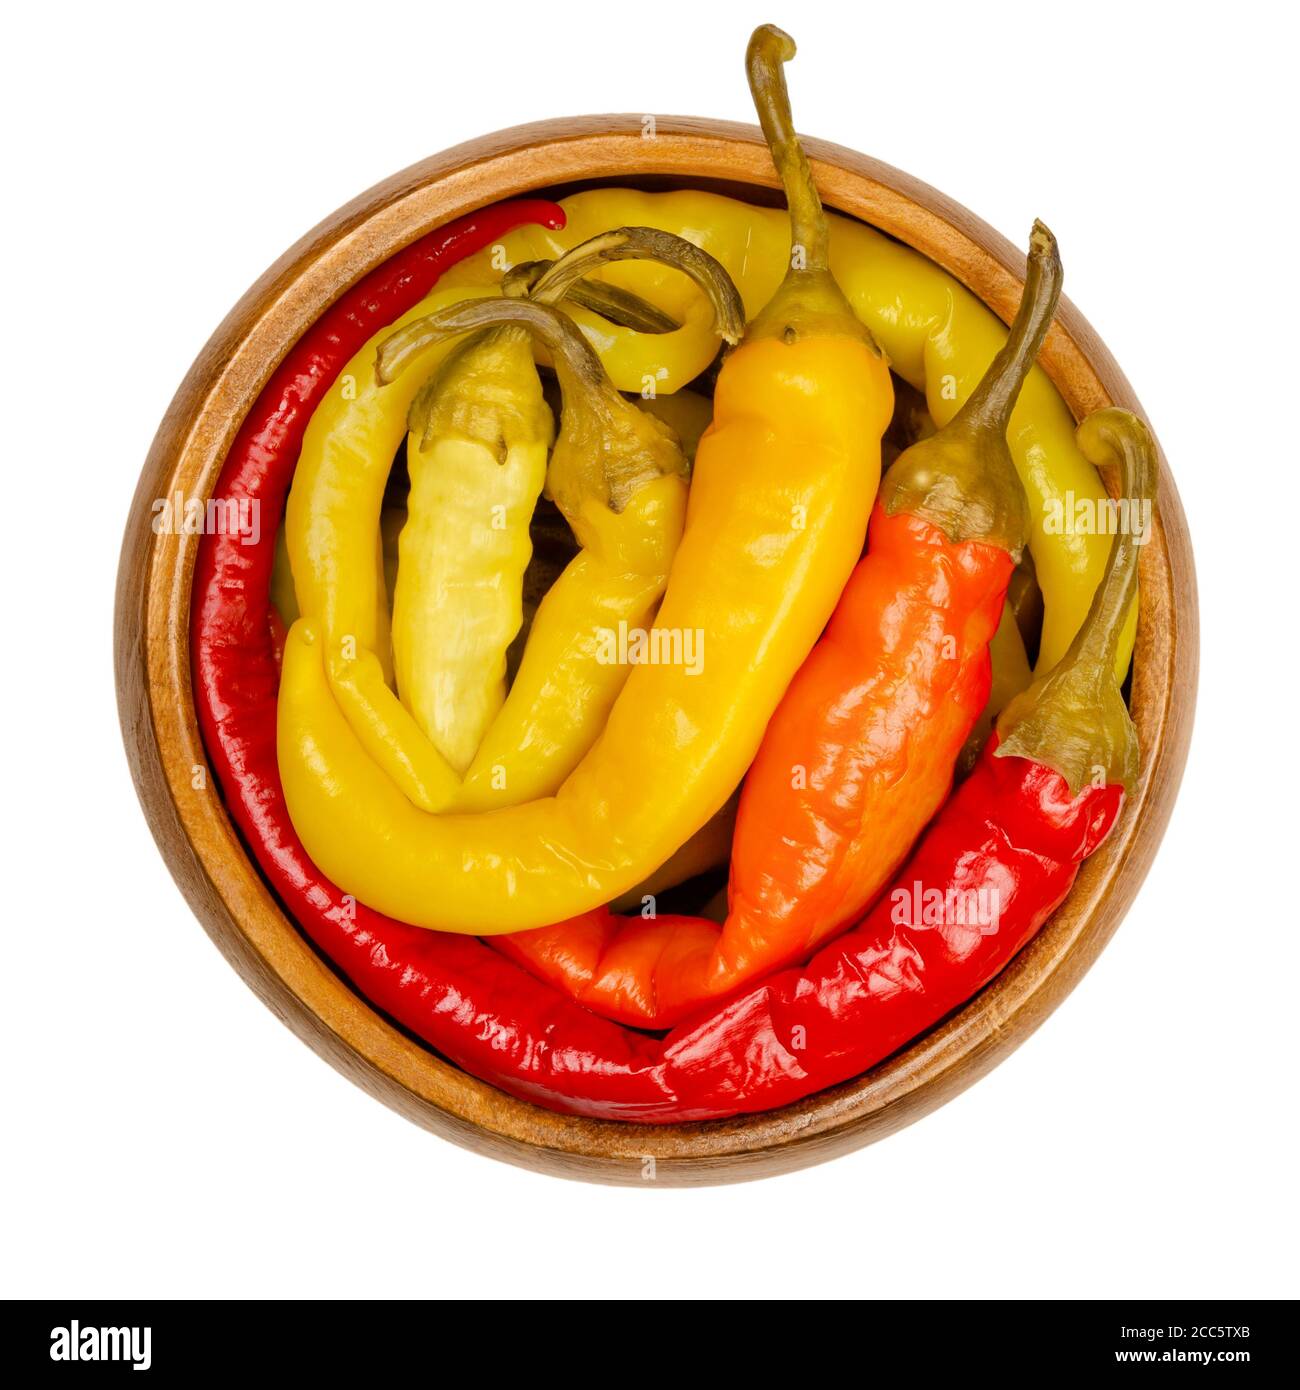 Peperoni pickles in a wooden bowl. Pickled whole chili peppers of different bright colors. Vegetable, preserved in brine. Capsicum. Stock Photo